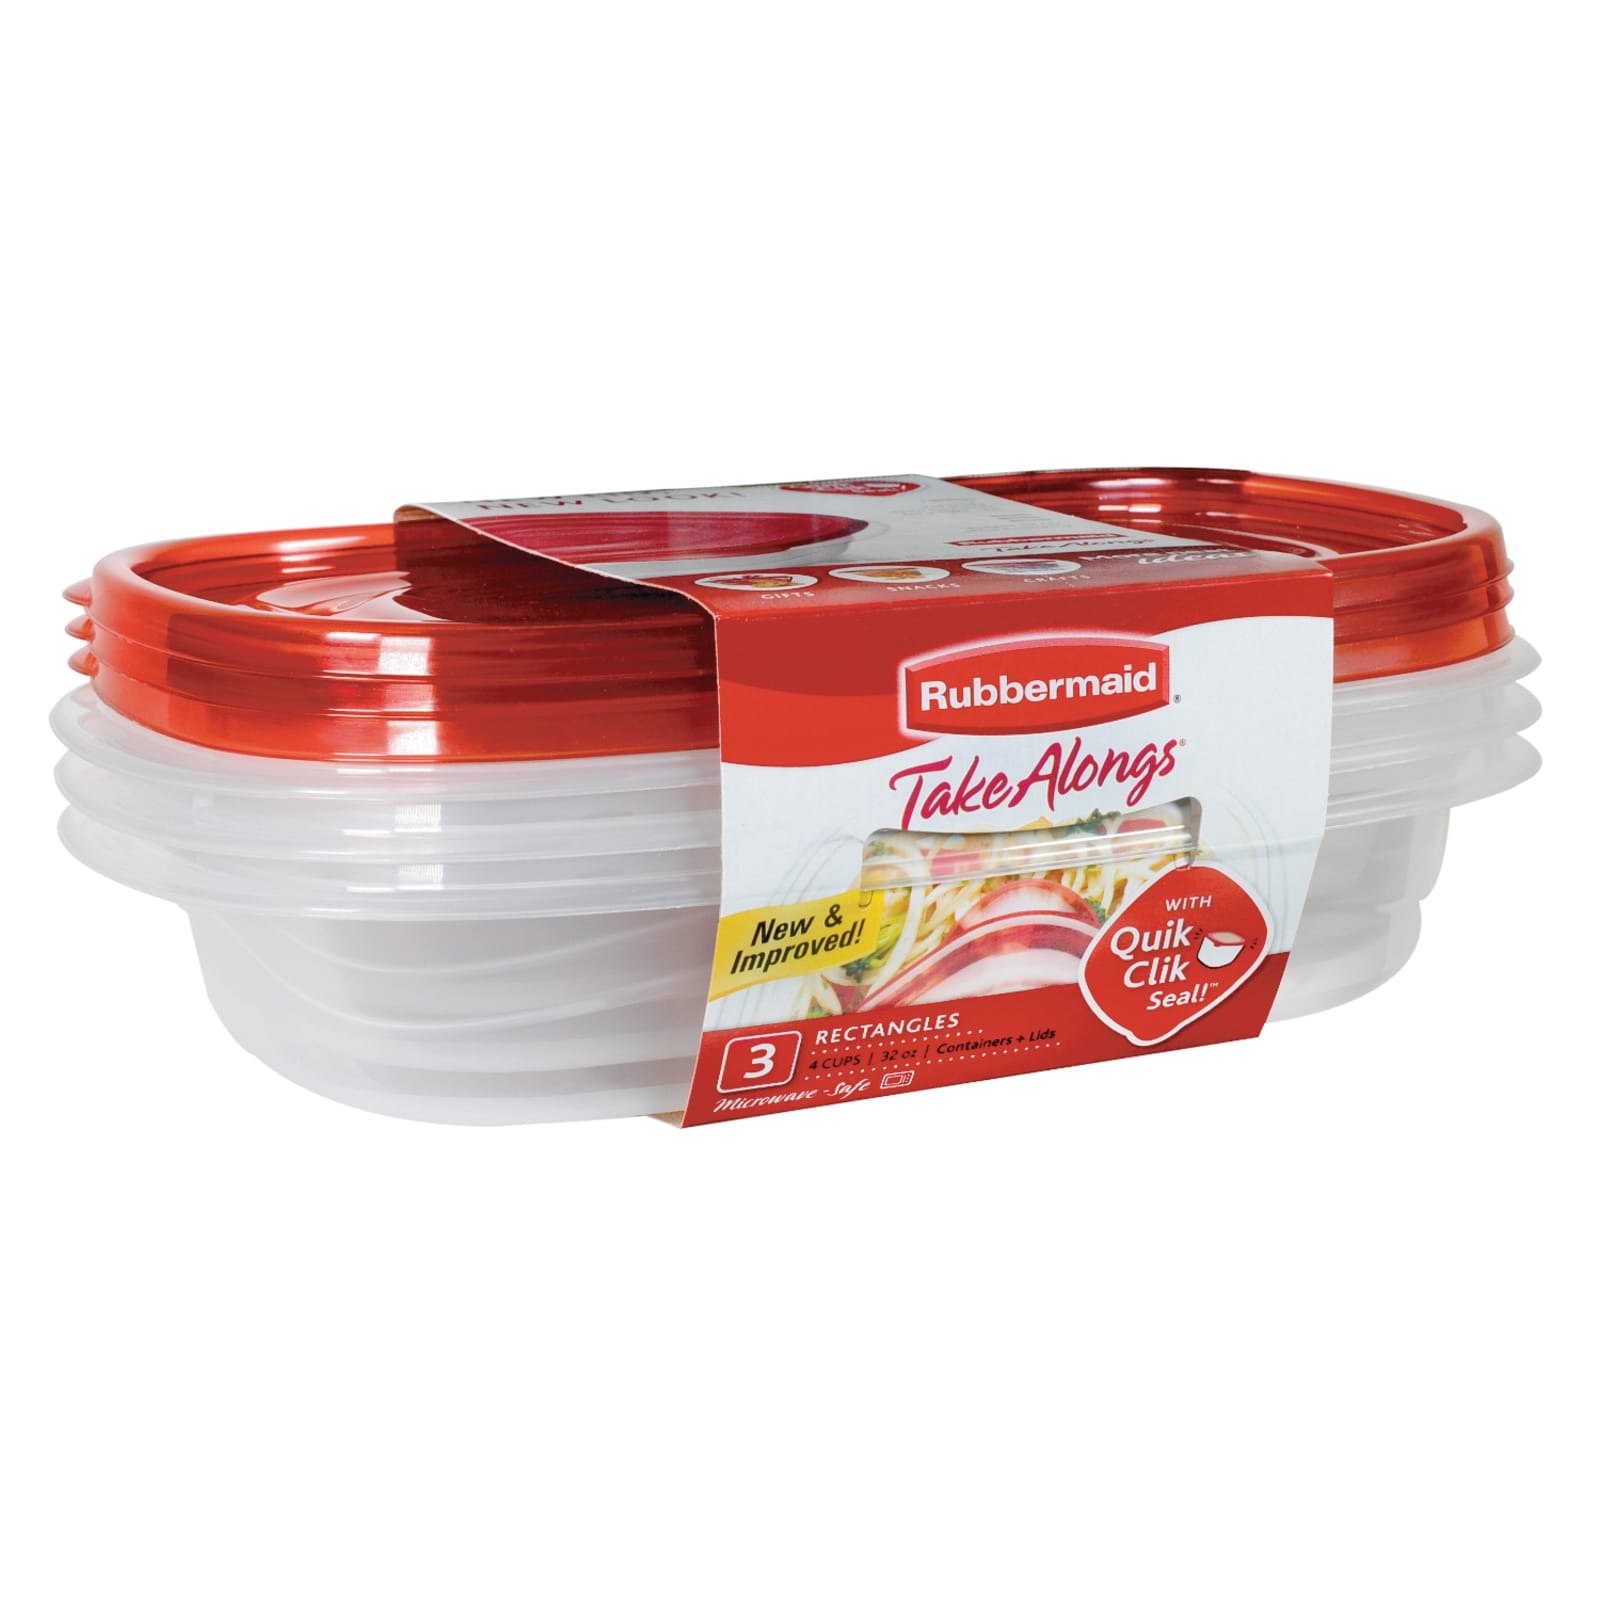 Rubbermaid - Rubbermaid, Take Alongs - Container & Lids, Deep Rectangles, 8  Cup (2 count), Shop